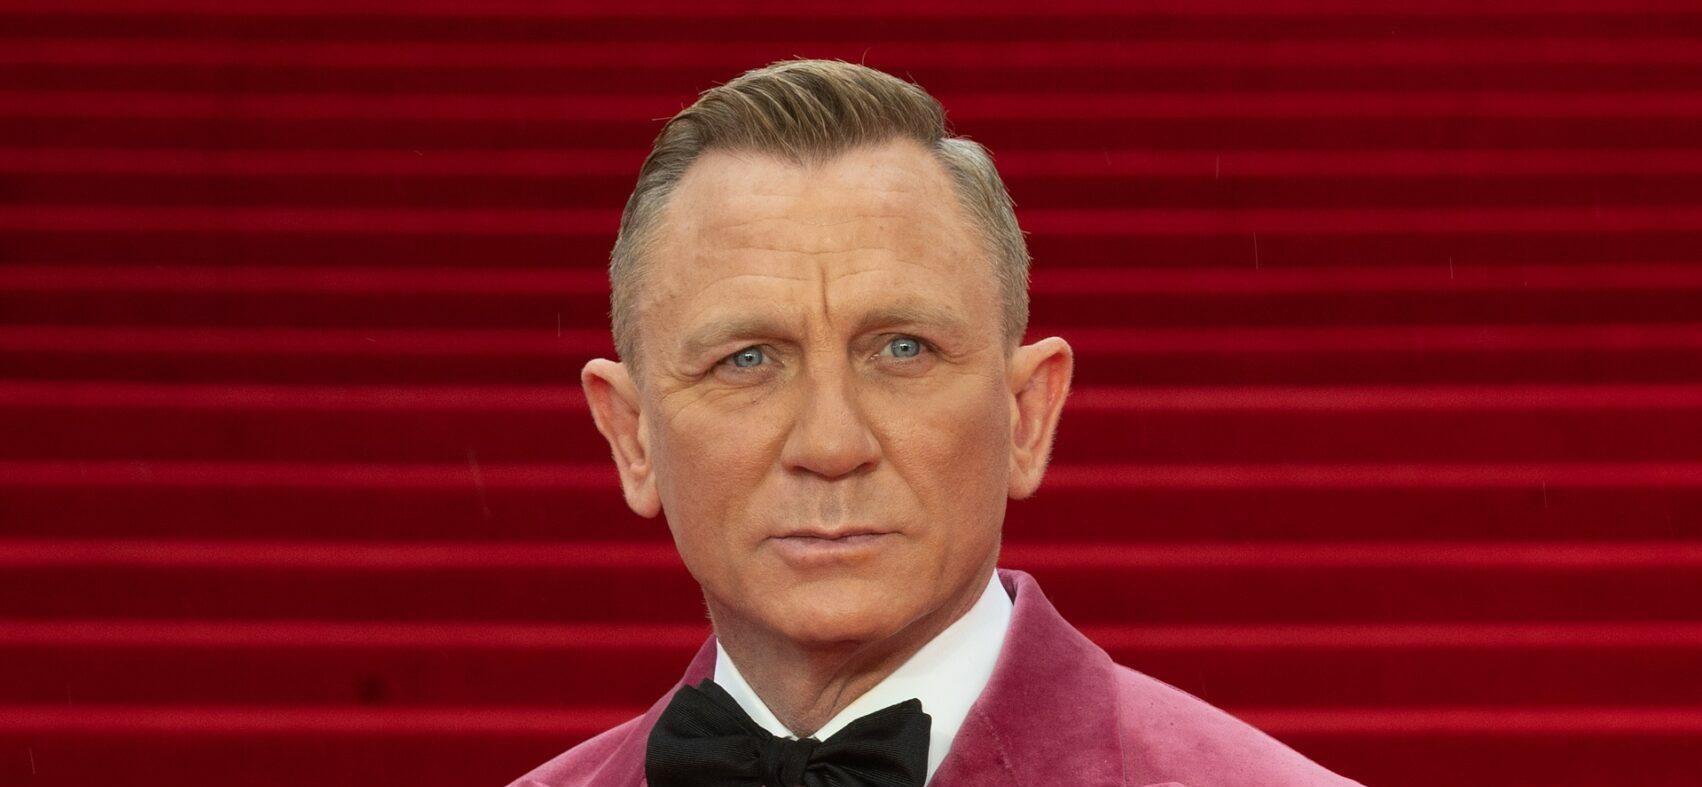 Daniel Craig Reveals He Never Thought He Would Land Role of James Bond